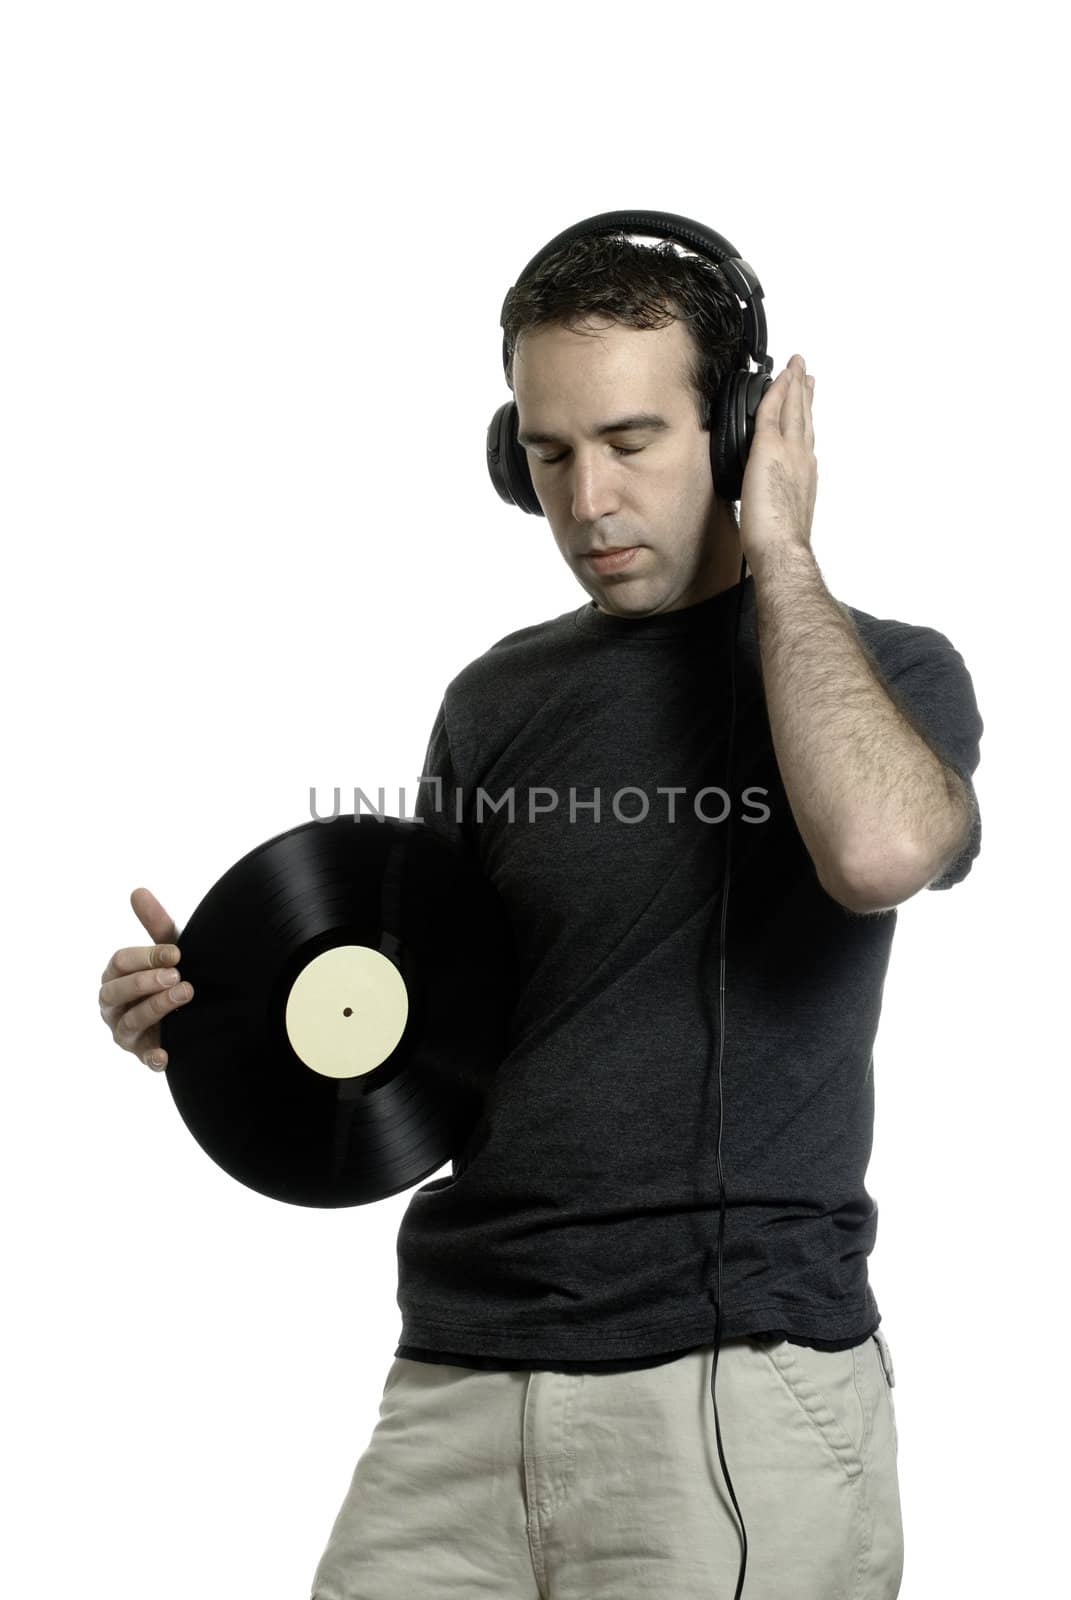 A young man wearing a set of headphones and holding an old LP record, isolated against a white background